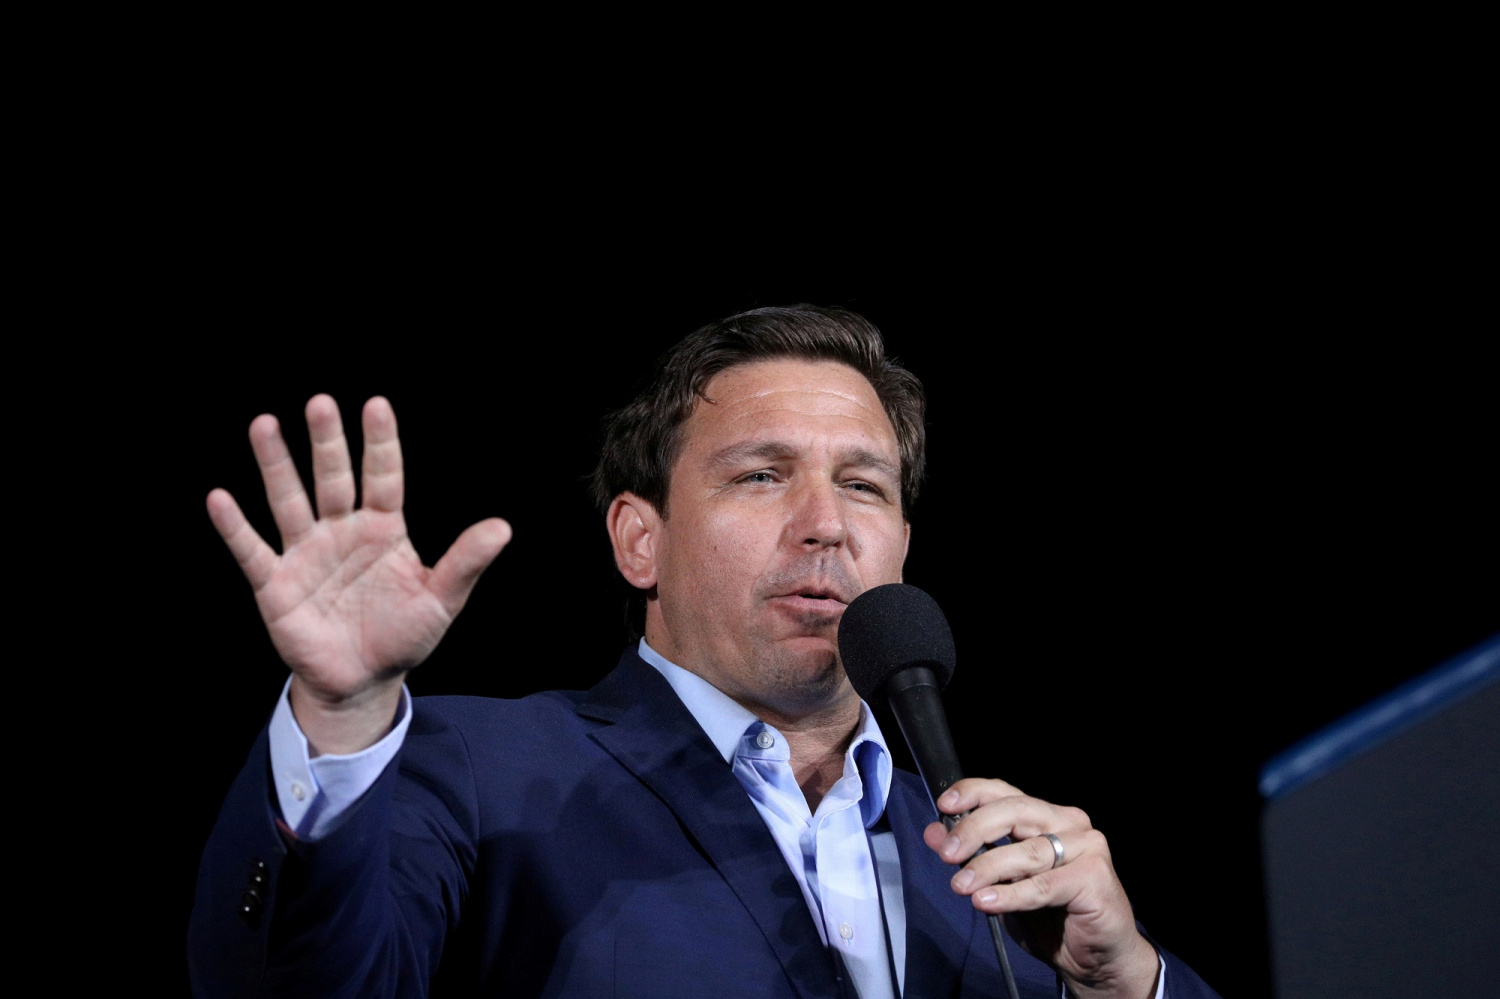 FILE PHOTO: Florida Governor Ron Desantis speaks during a campaign rally by U.S. President Donald Trump at Pensacola International Airport in Pensacola, Florida, U.S., October 23, 2020. 